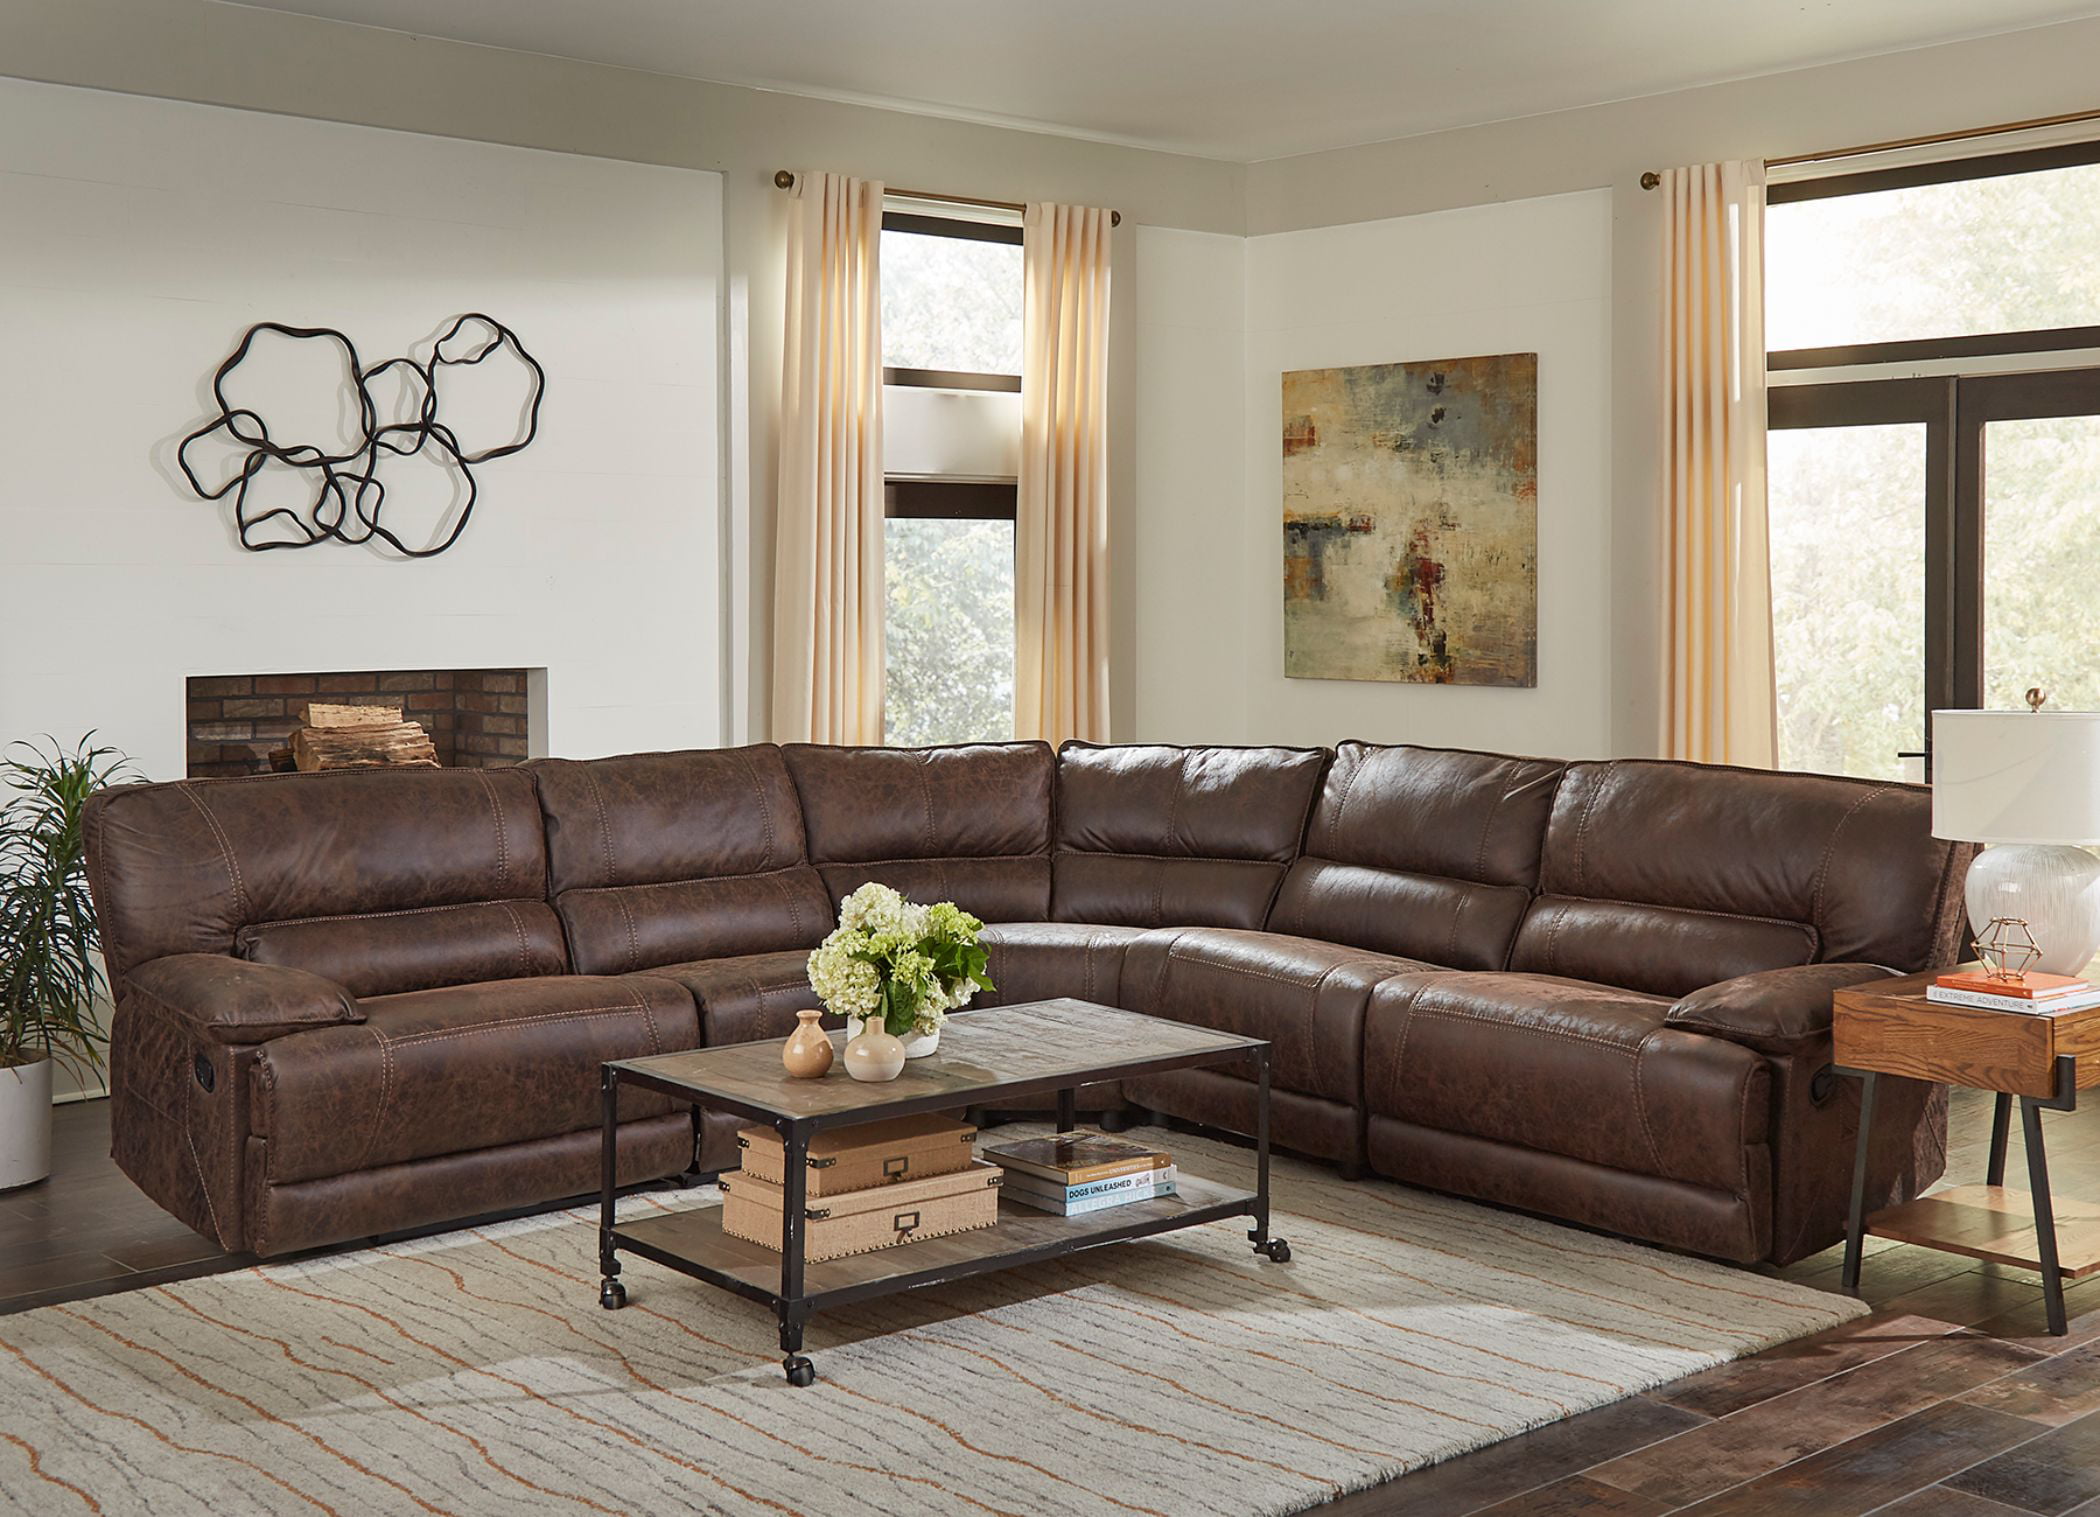 Malyn Weathered Brown Faux Leather Reclining Sectional Sofa with ...